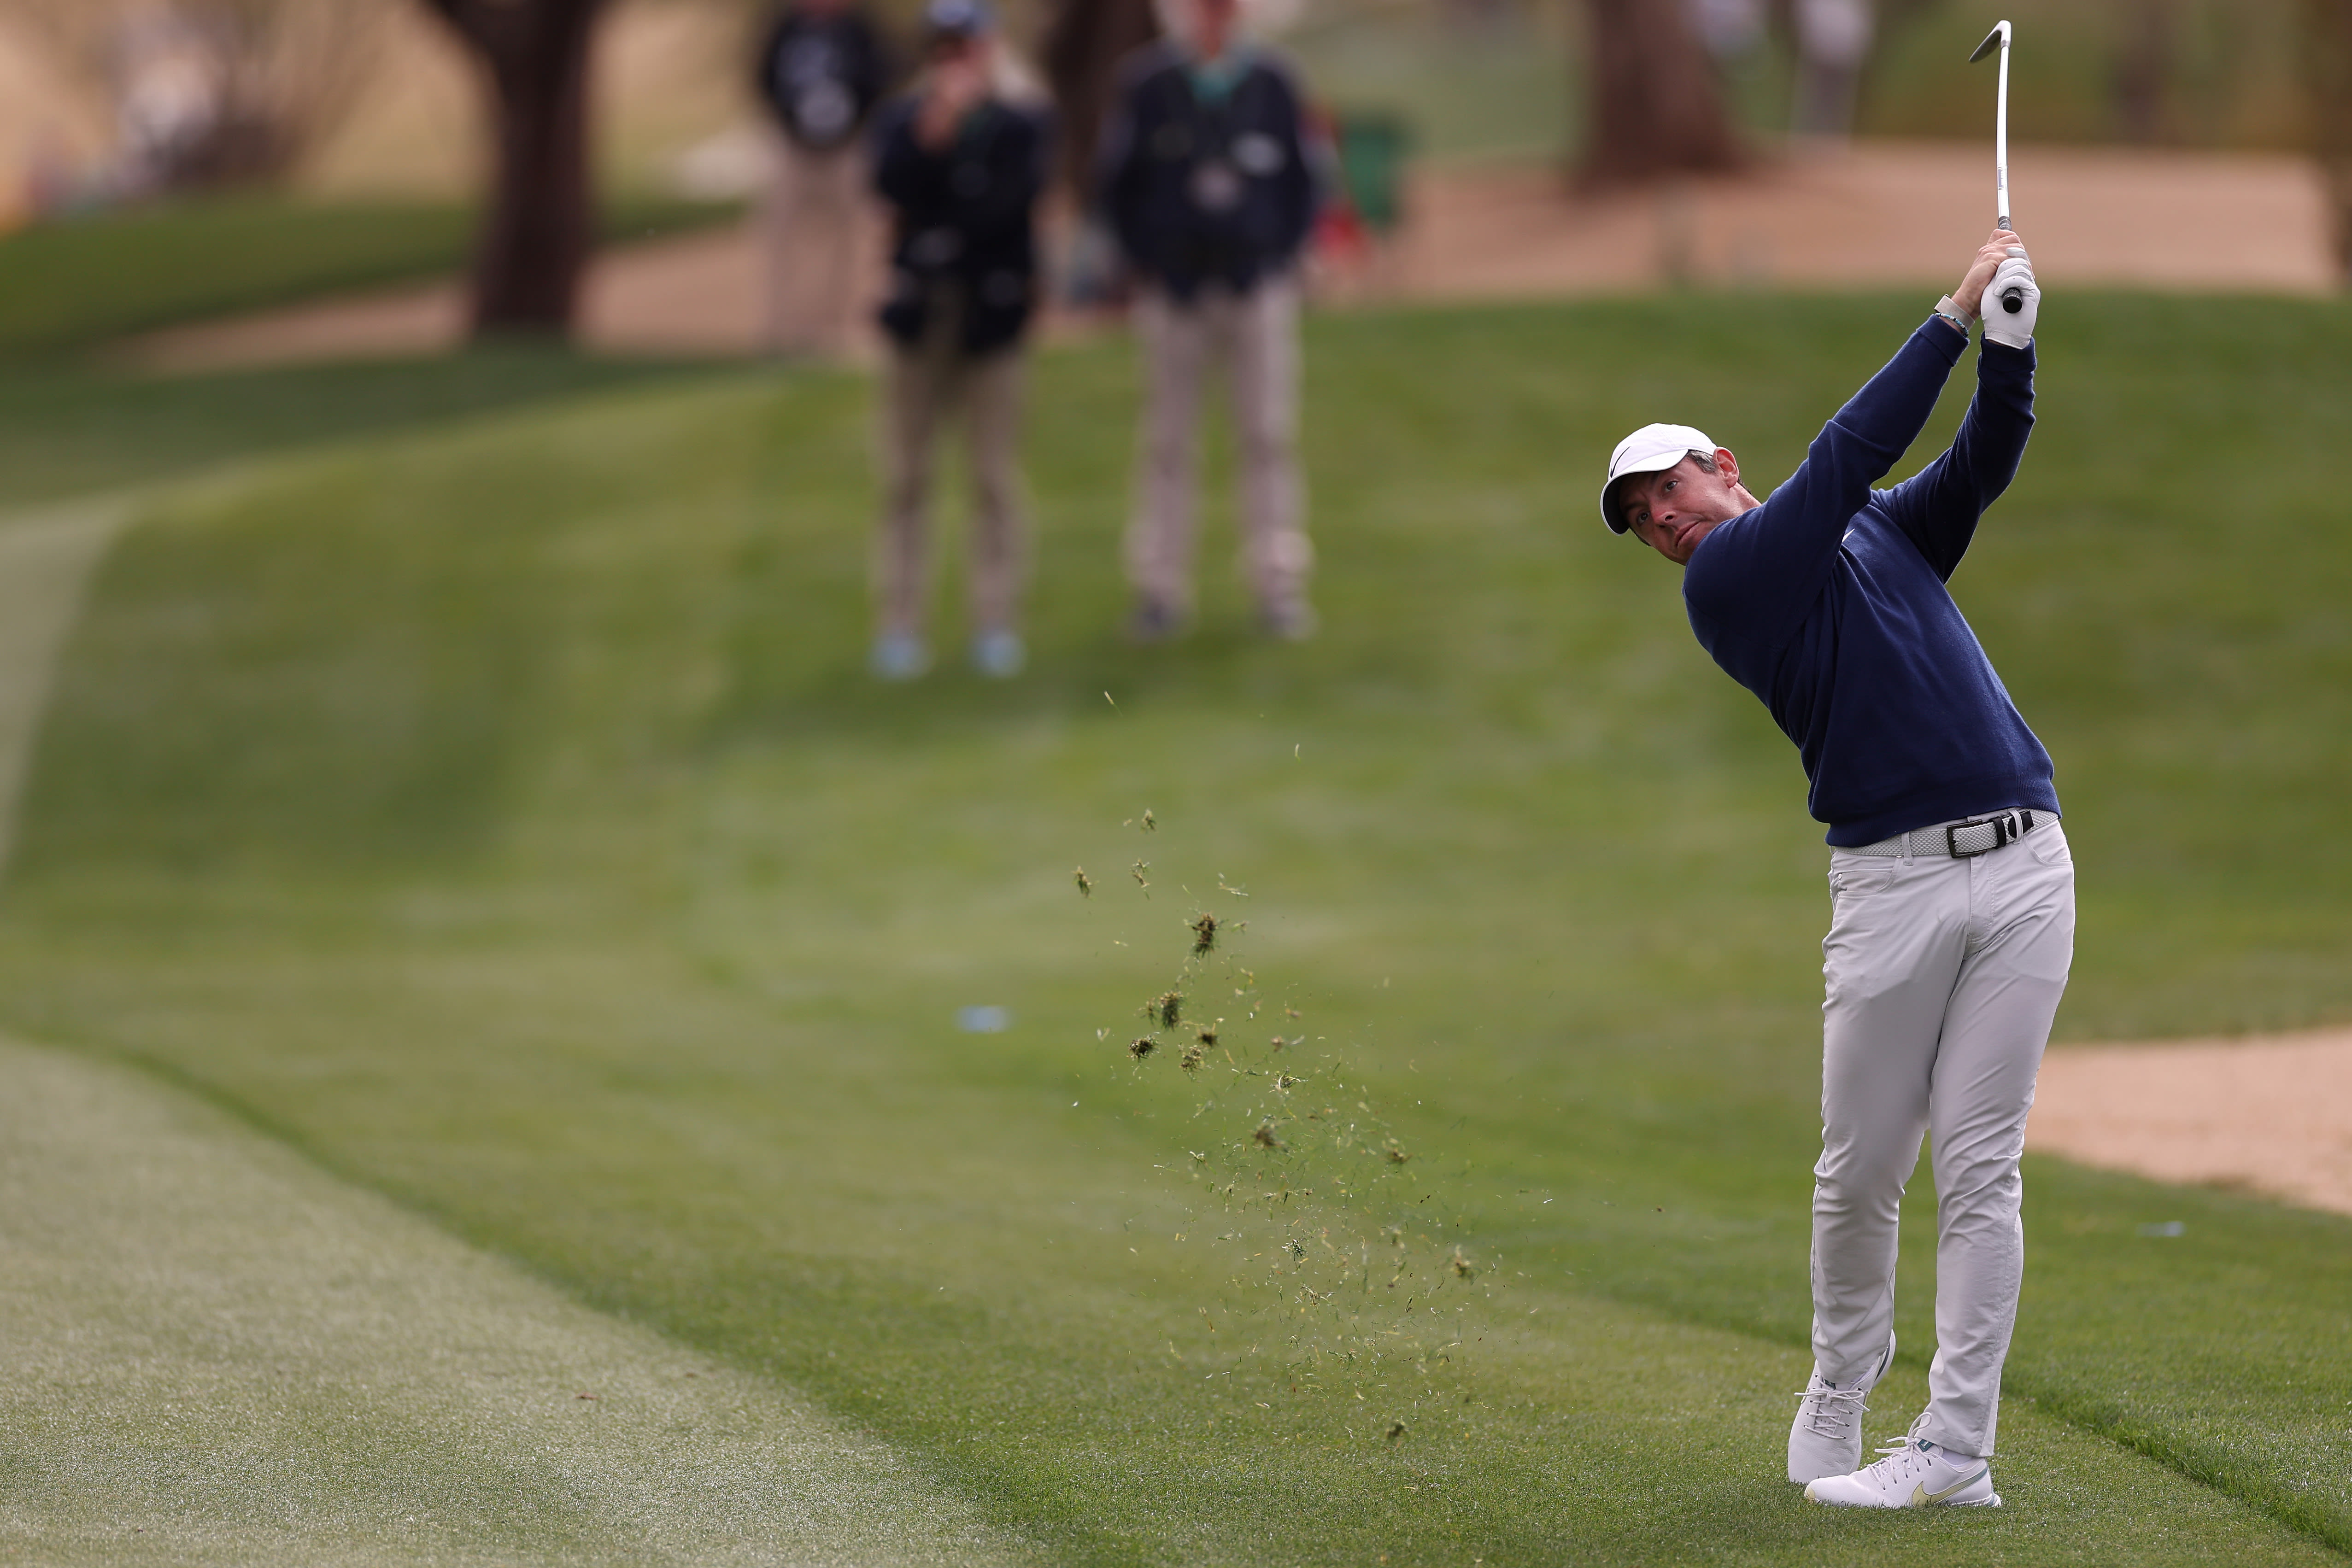 Rory McIlroy plays an approach shot on the 13th hole during the third round of the 2023 WM Phoenix Open. (Photo by Steph Chambers/Getty Images)